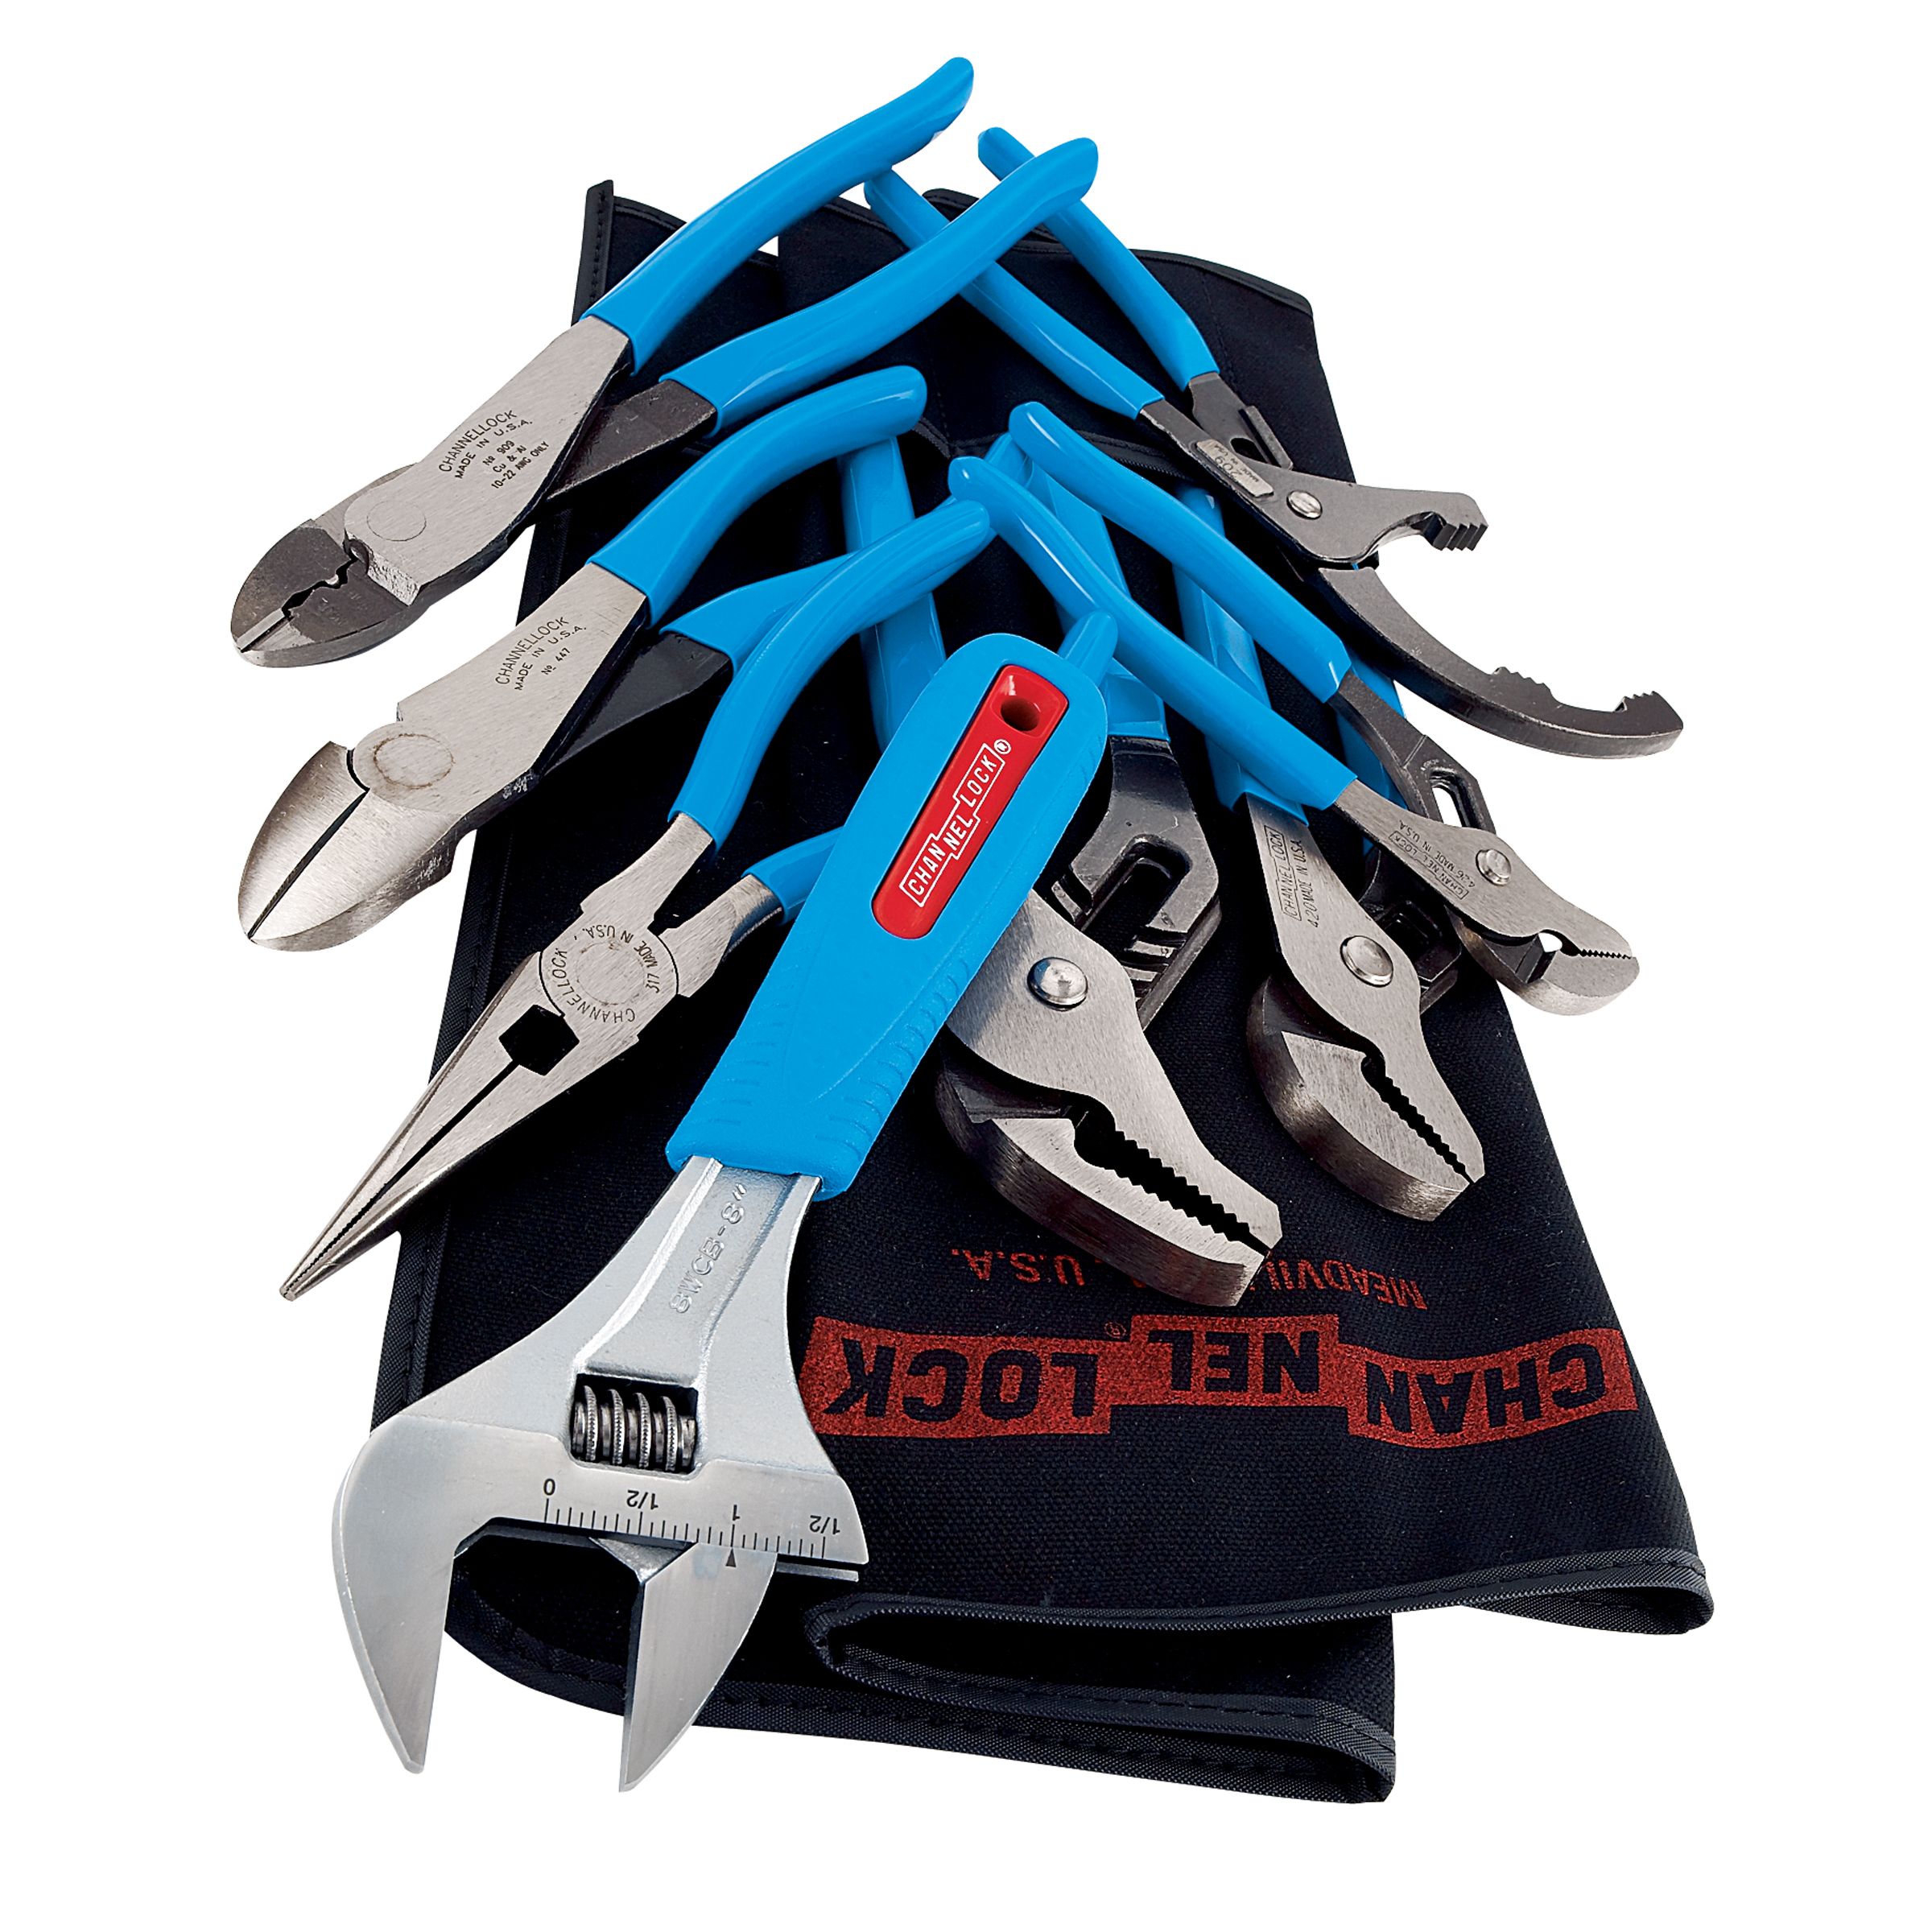 Channellock 8-piece Tool Set in a Canvas Tool Roll